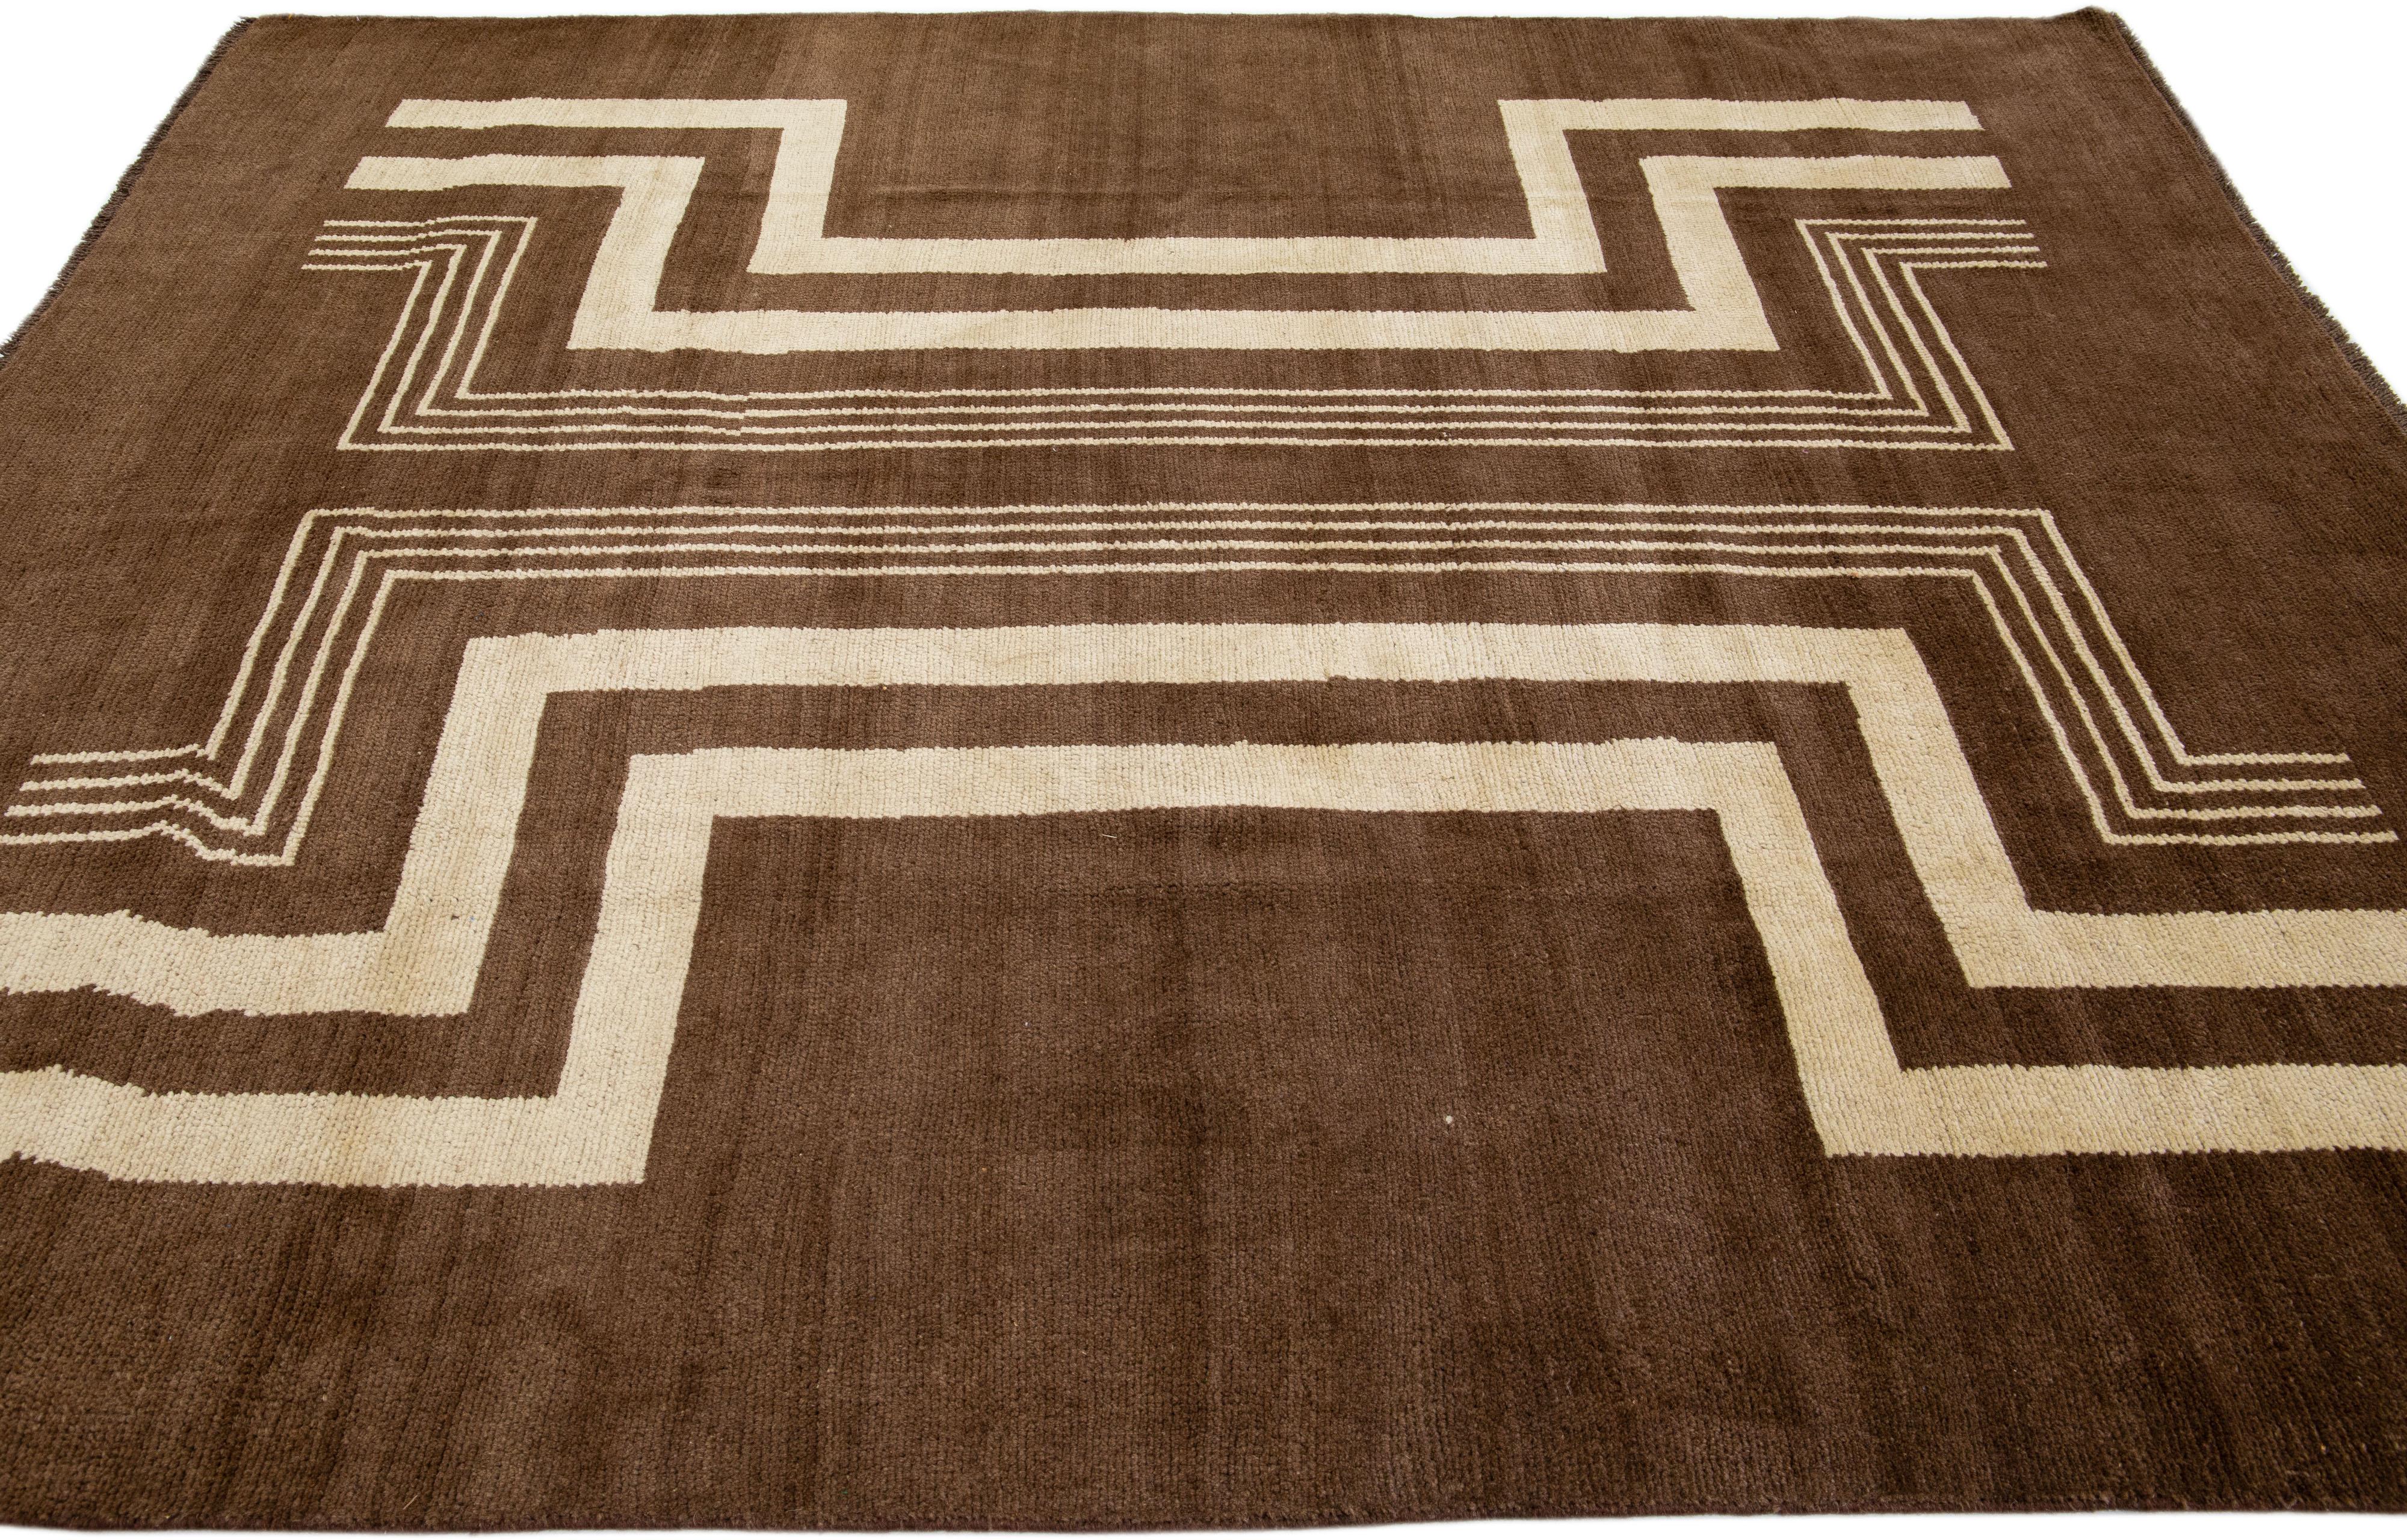 Transitional Art Deco Style Brown Handmade Designed Wool Rug by Apadana In New Condition For Sale In Norwalk, CT